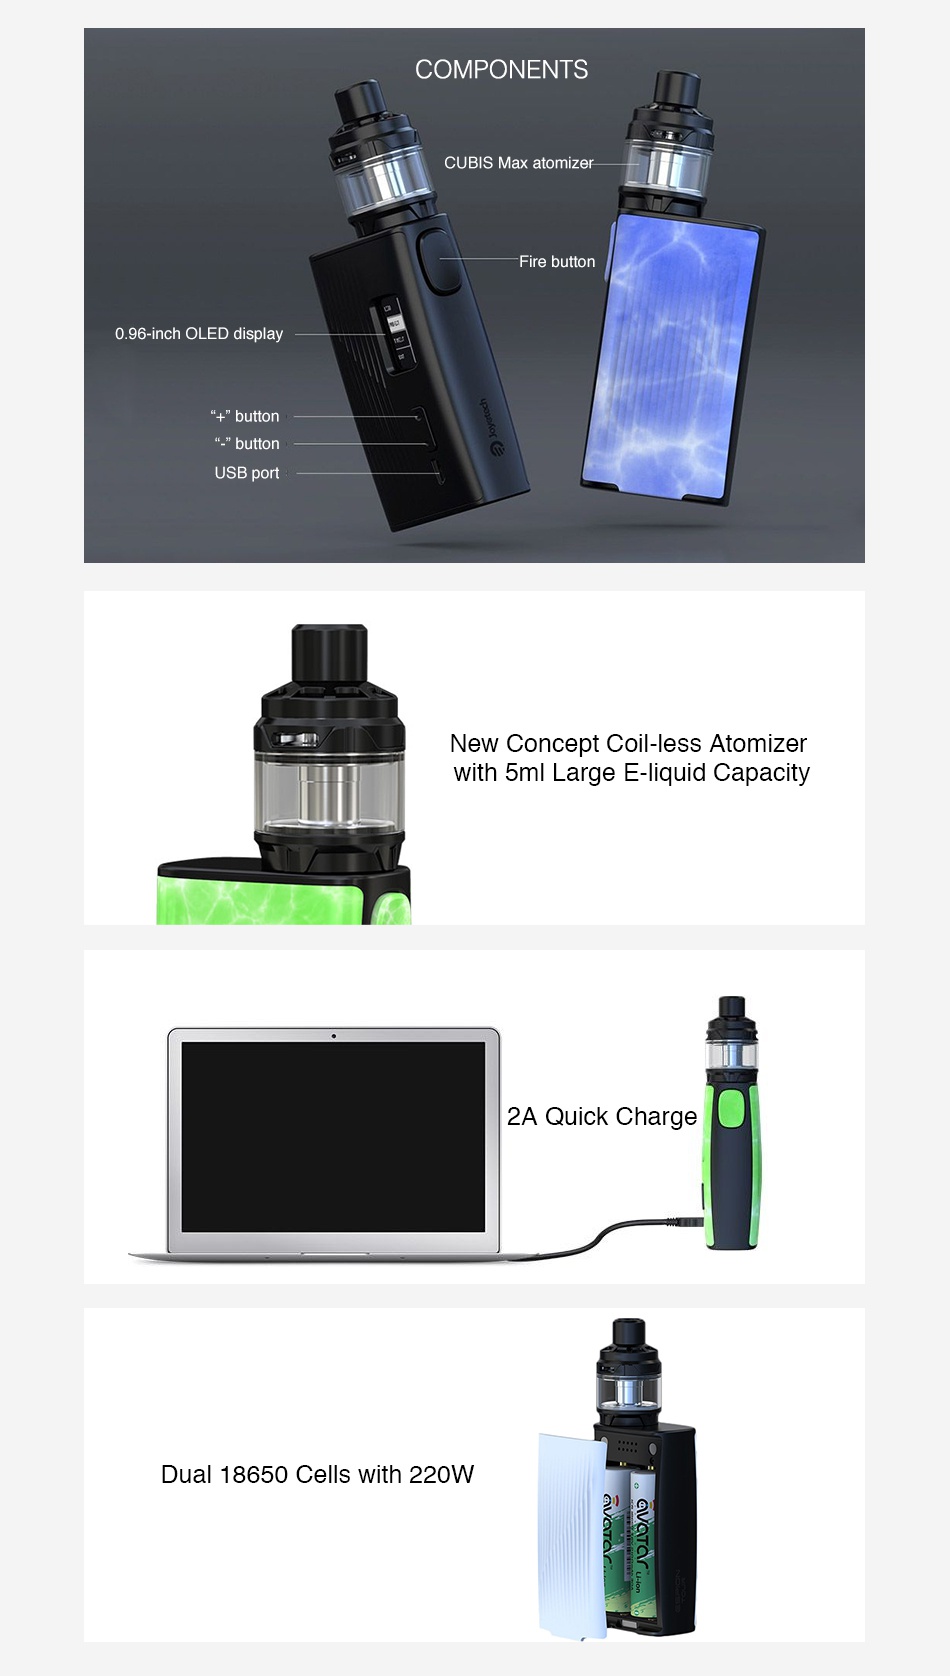 Joyetech ESPION Tour 220W TC Kit with Cubis Max COMPONENTS CUBIS Max atomizer 0 96 inch OLED display button USB port New Concept coil less atomizer with 5ml Large E liquid capacity 2A Quick Charge Dual 18650 Cells with 220W